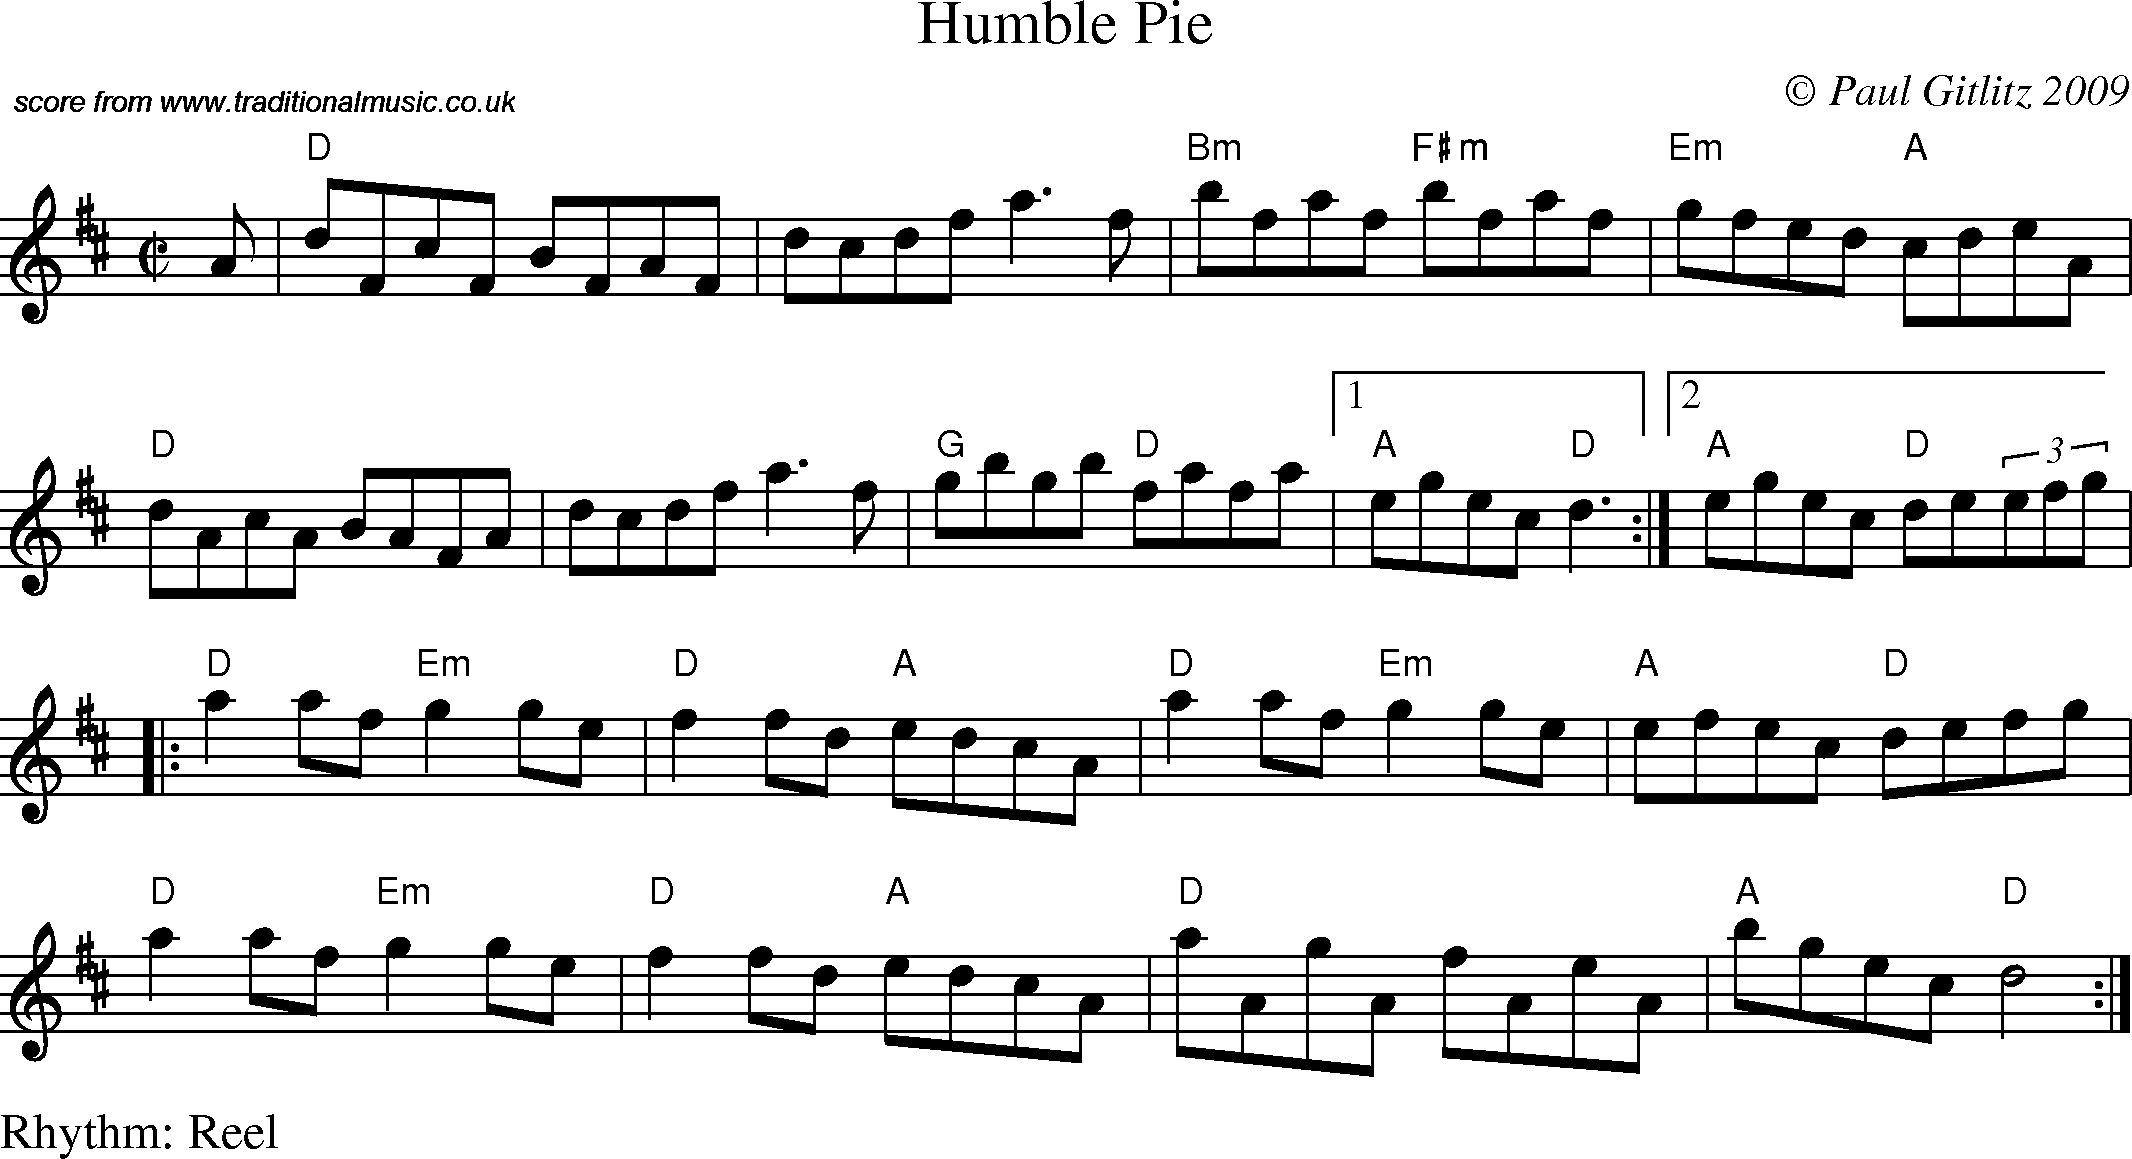 Sheet Music Score for Reel - Humble Pie